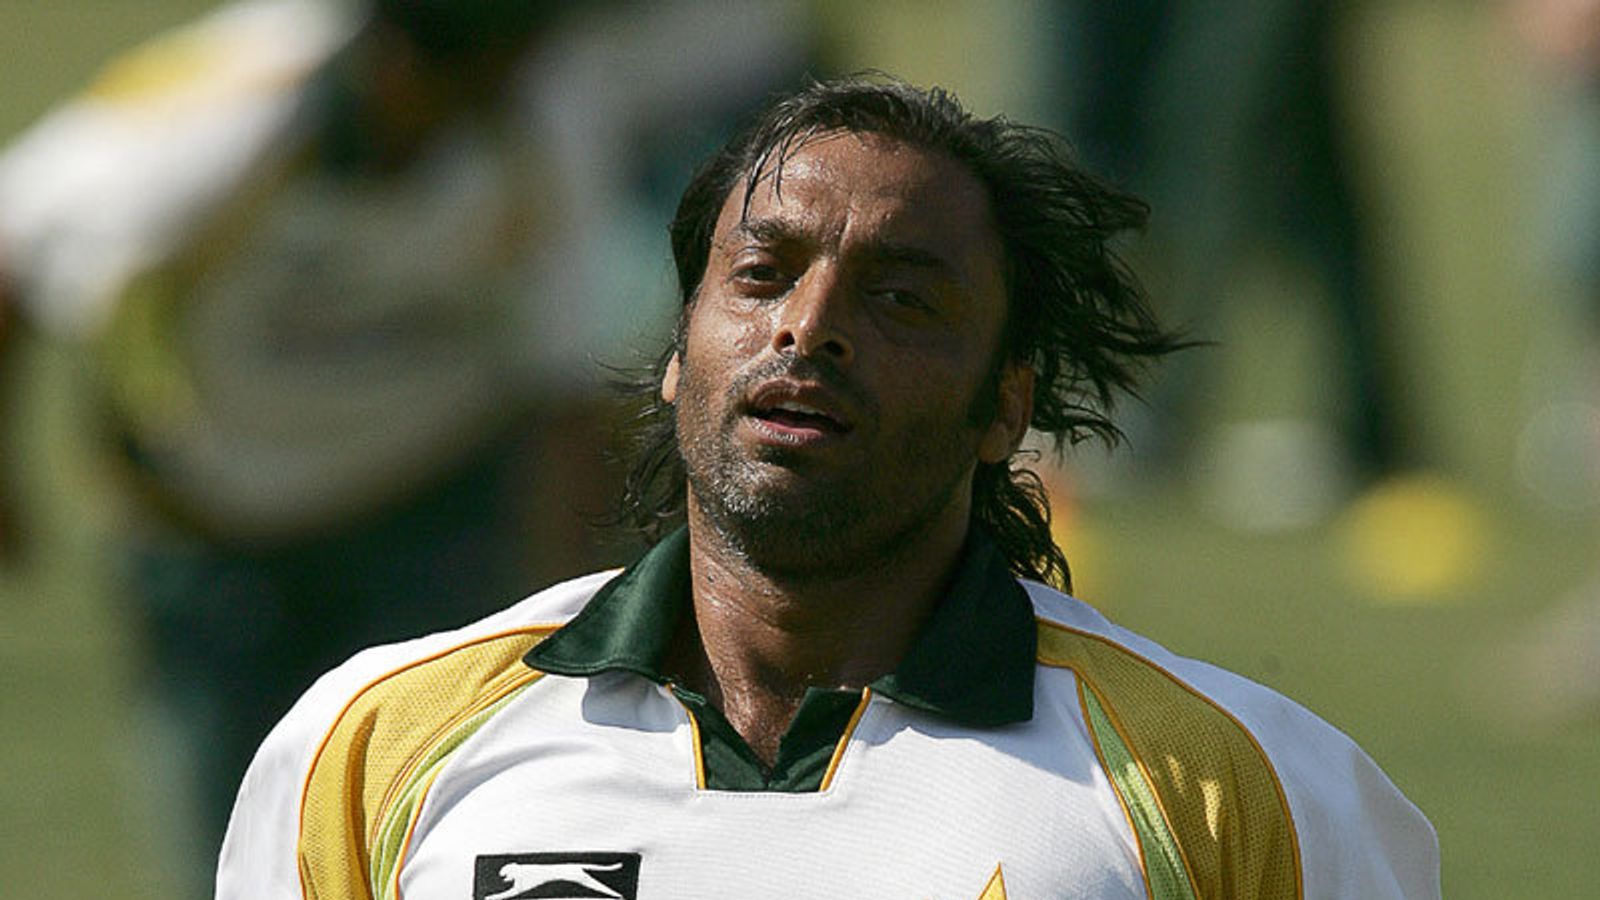 HD wallpaper: cricket, Shoaib Akhter, men, real people, two people,  lifestyles | Wallpaper Flare